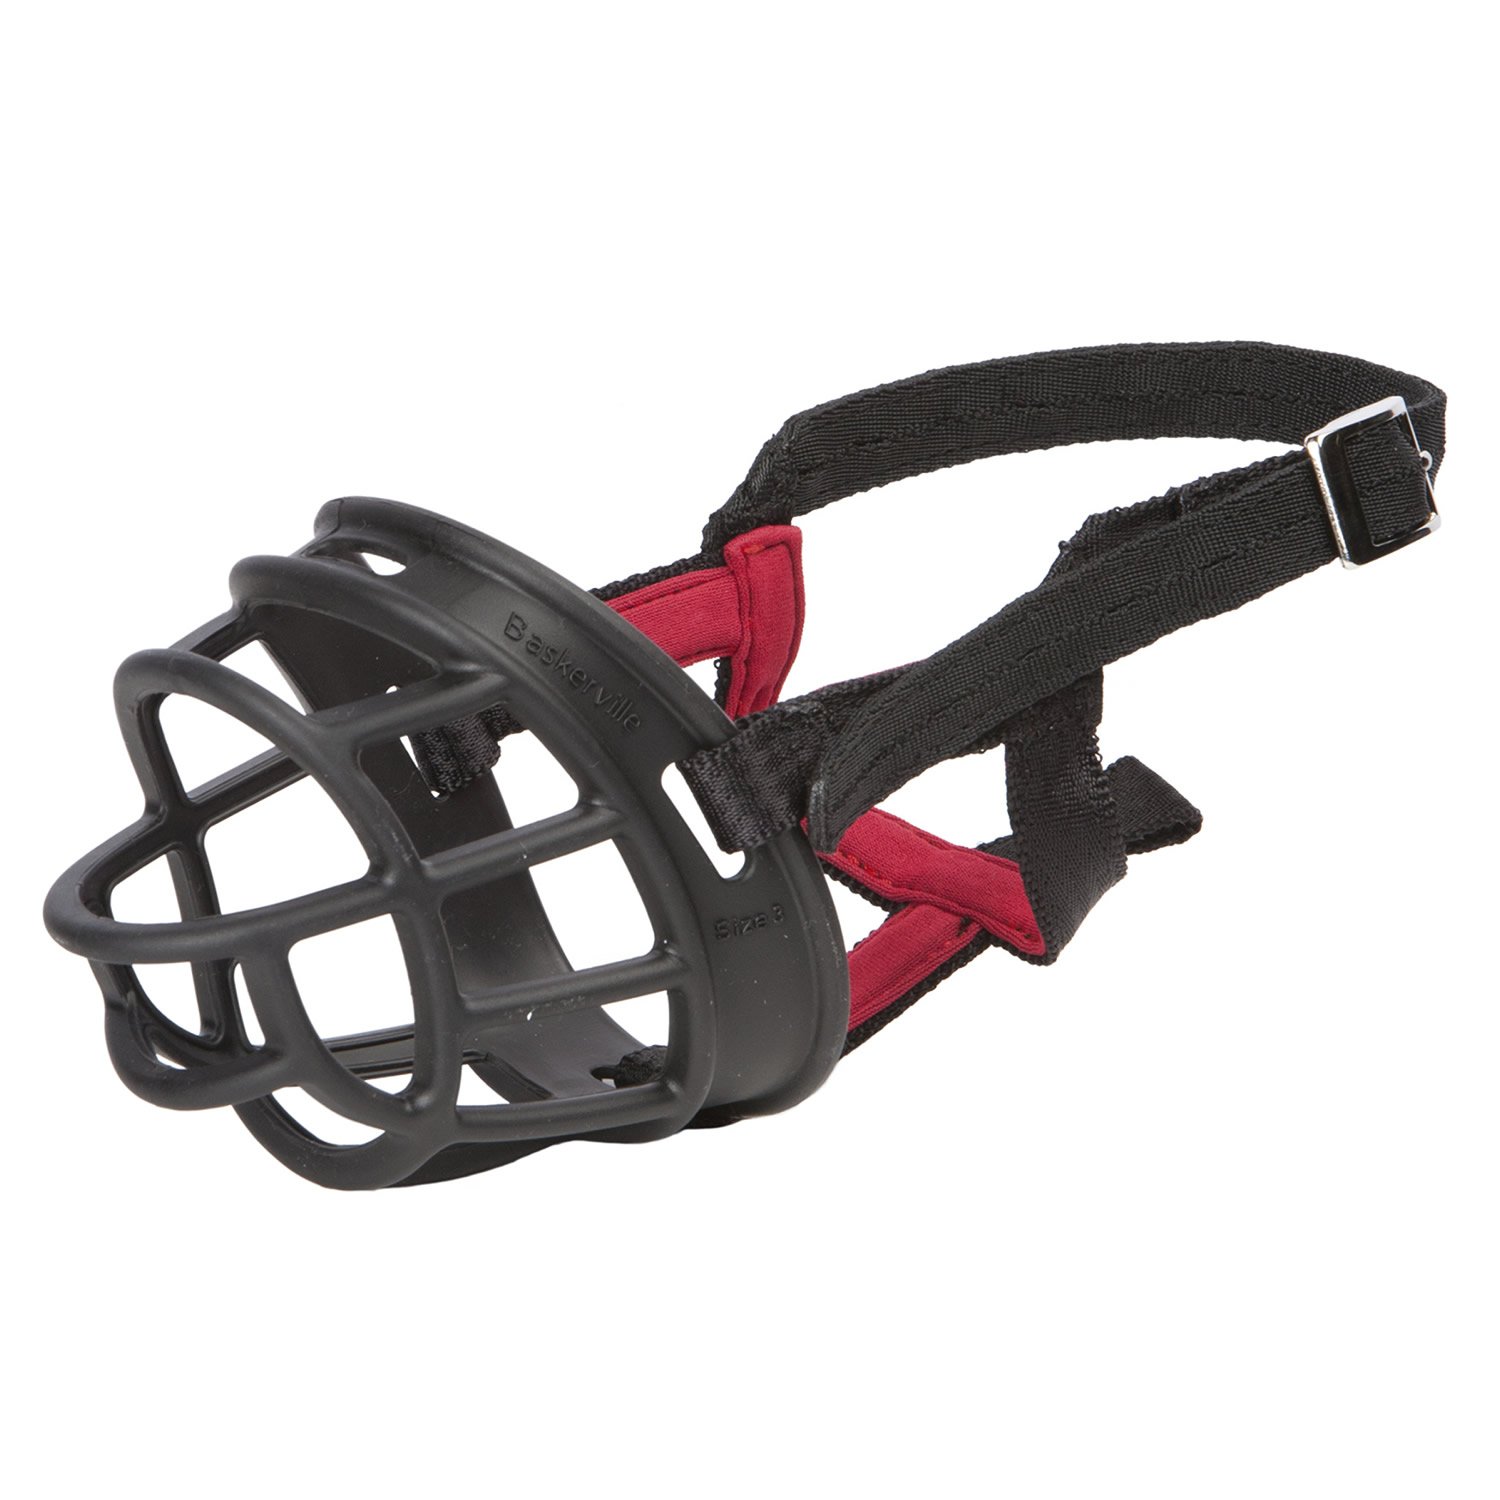 Petlife Baskerville Extra Large Size 5 Muzzle For Dogs